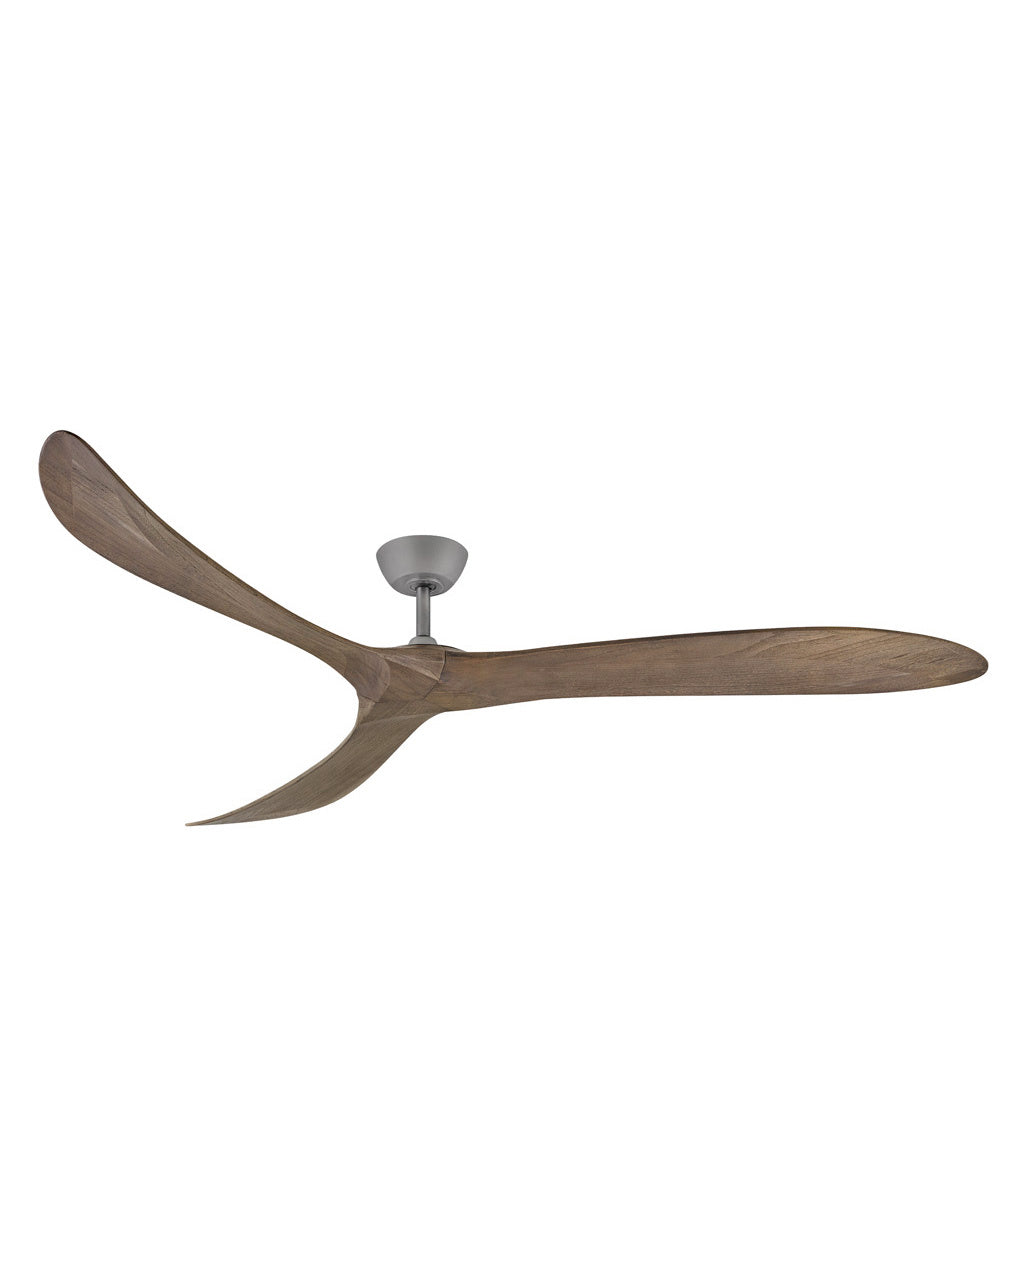 Hinkley Swell 903880FGT-NDD Ceiling Fan 80 - Graphite, Driftwood/